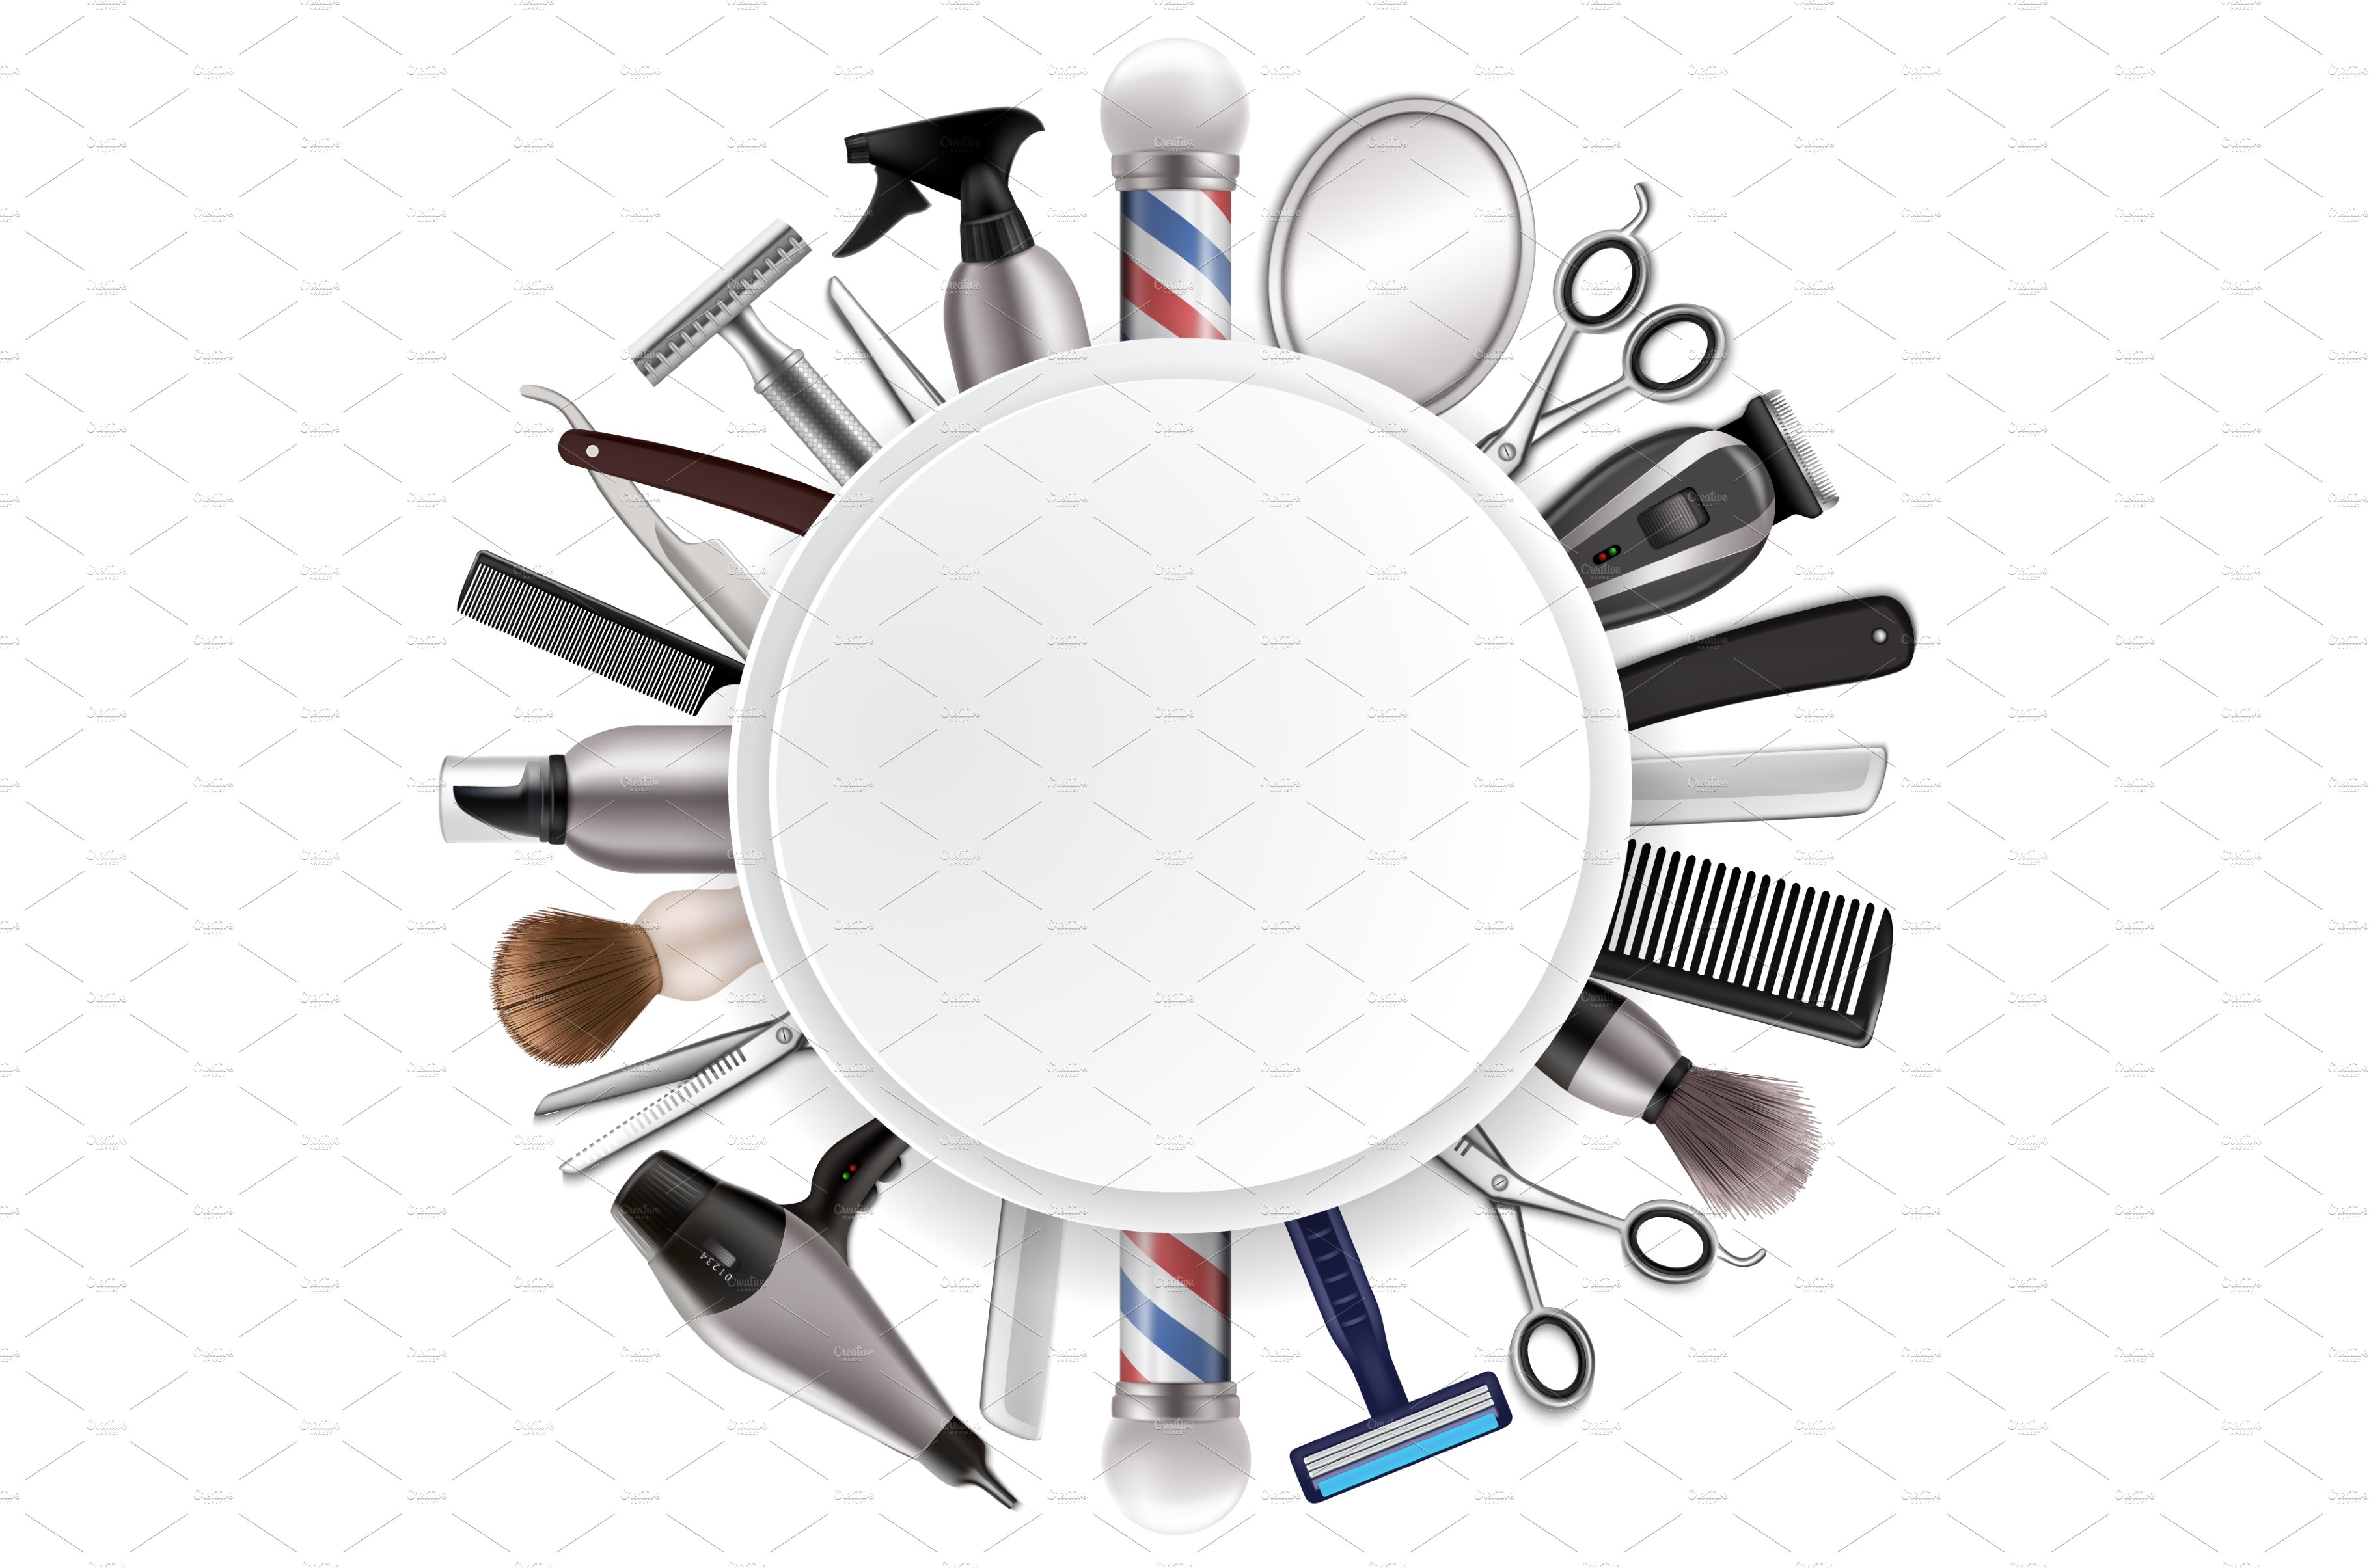 Barbershop frame with barber tools cover image.